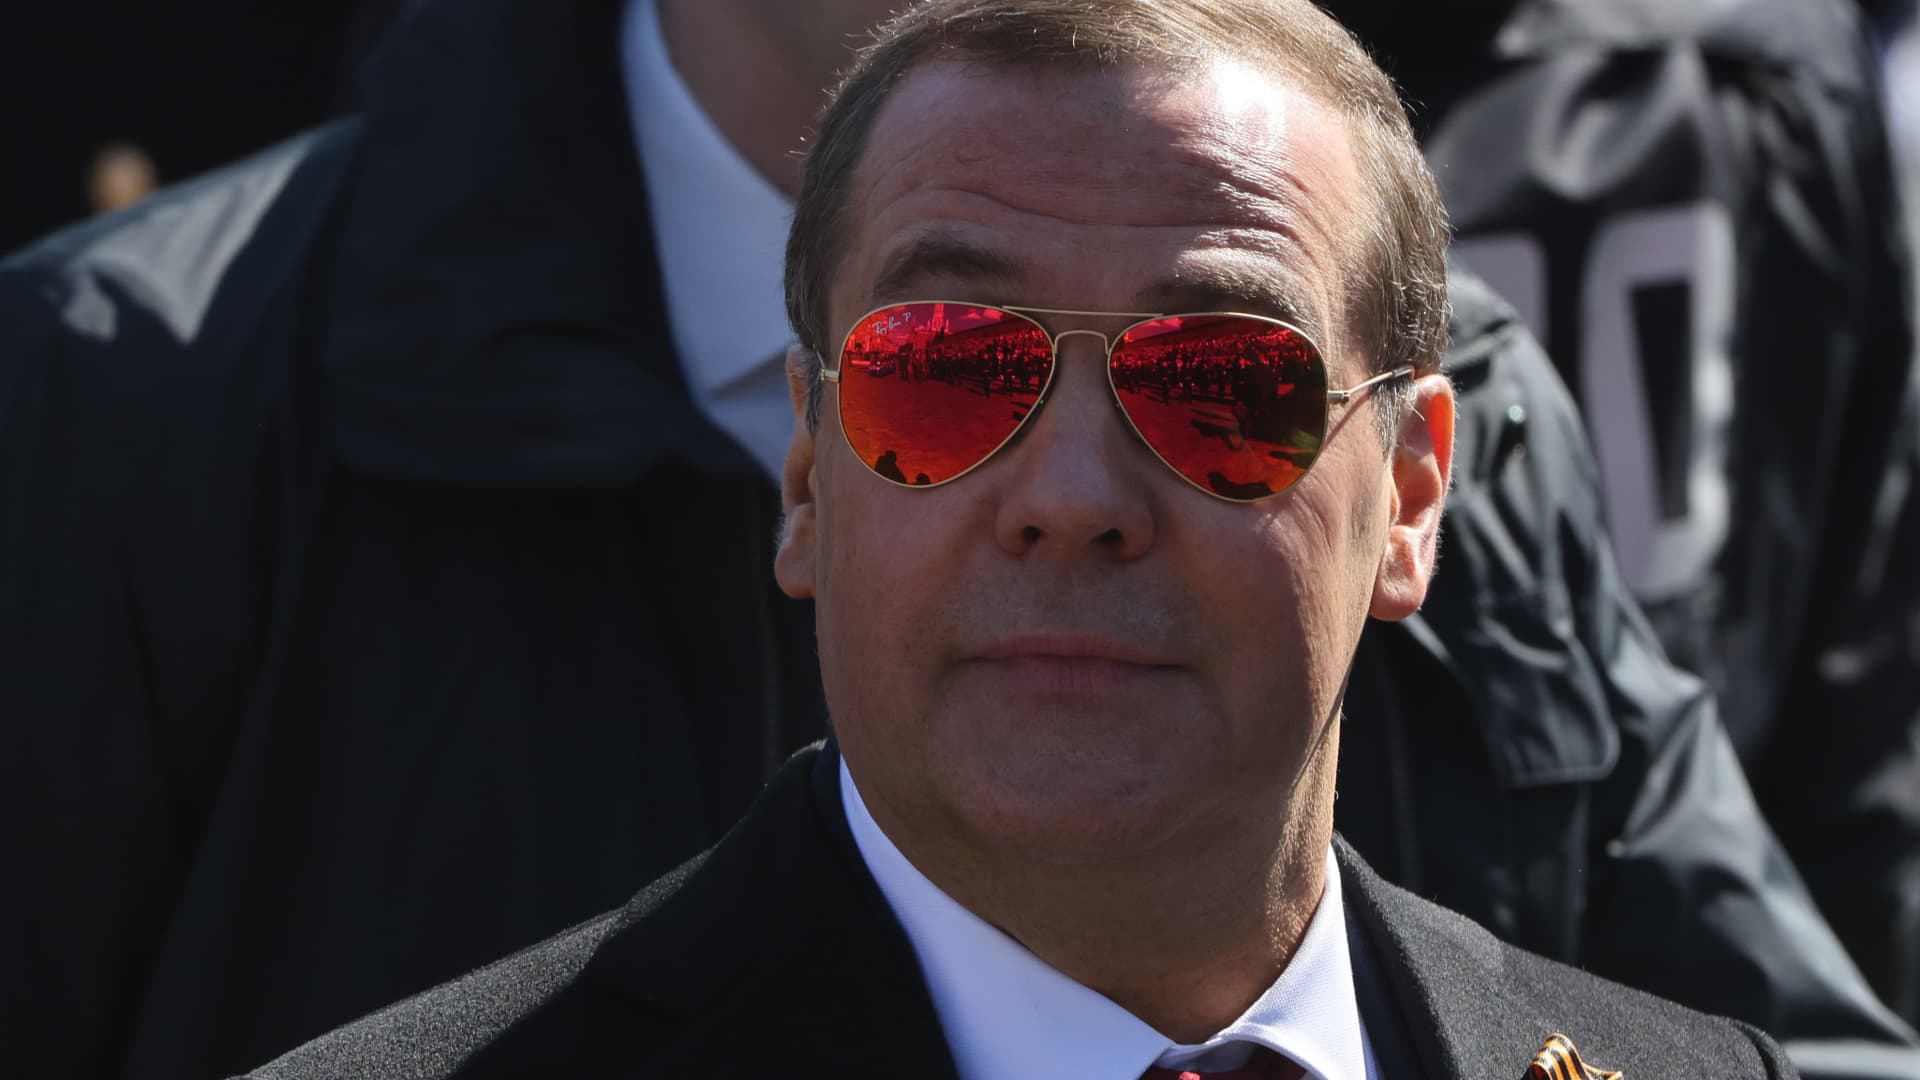 Russian Security Council Deputy Chairman Dmitry Medvedev wearing sunglasses arrives to the Victory Day Red Square Parade on May 9, 2023 in Moscow, Russia.